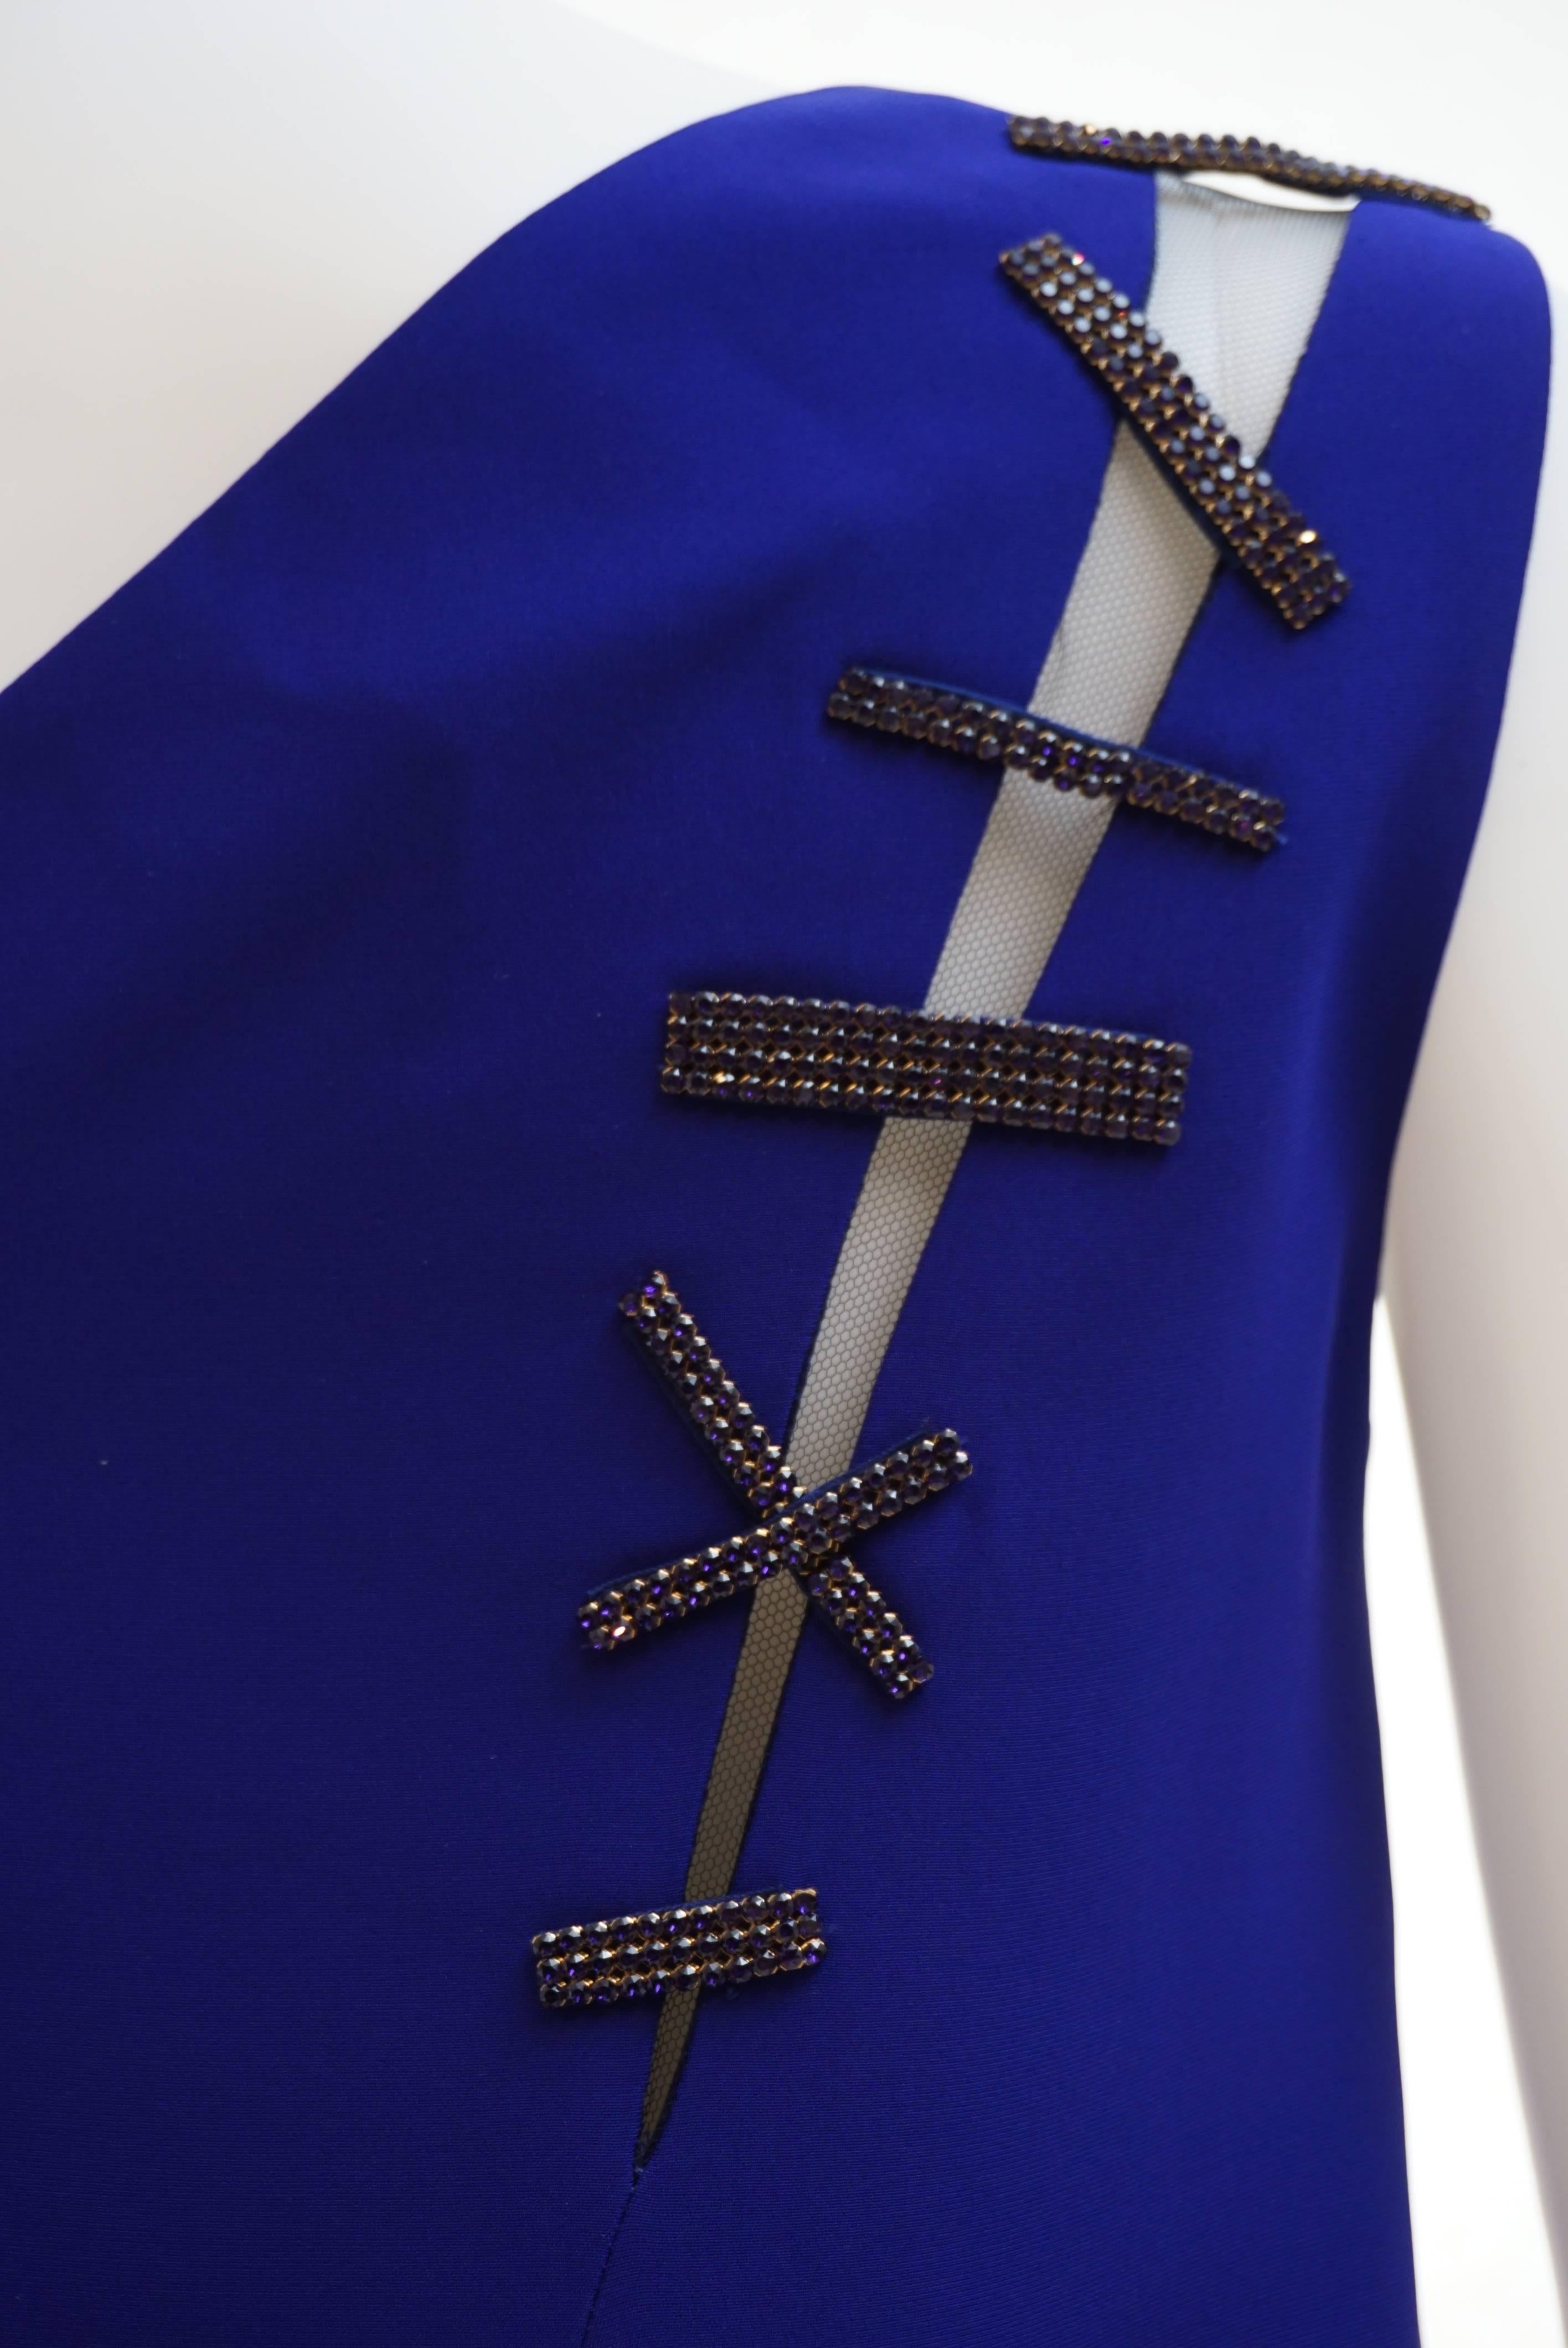 VERSACE 

Cut-out embellished crepe dress

This cobalt crepe dress is a standout creation. 

The sleek shift silhouette is slashed to reveal slices of skin, and repaired with glittering Swarovski crystal stitches. 

Fully lined

Hidden zip